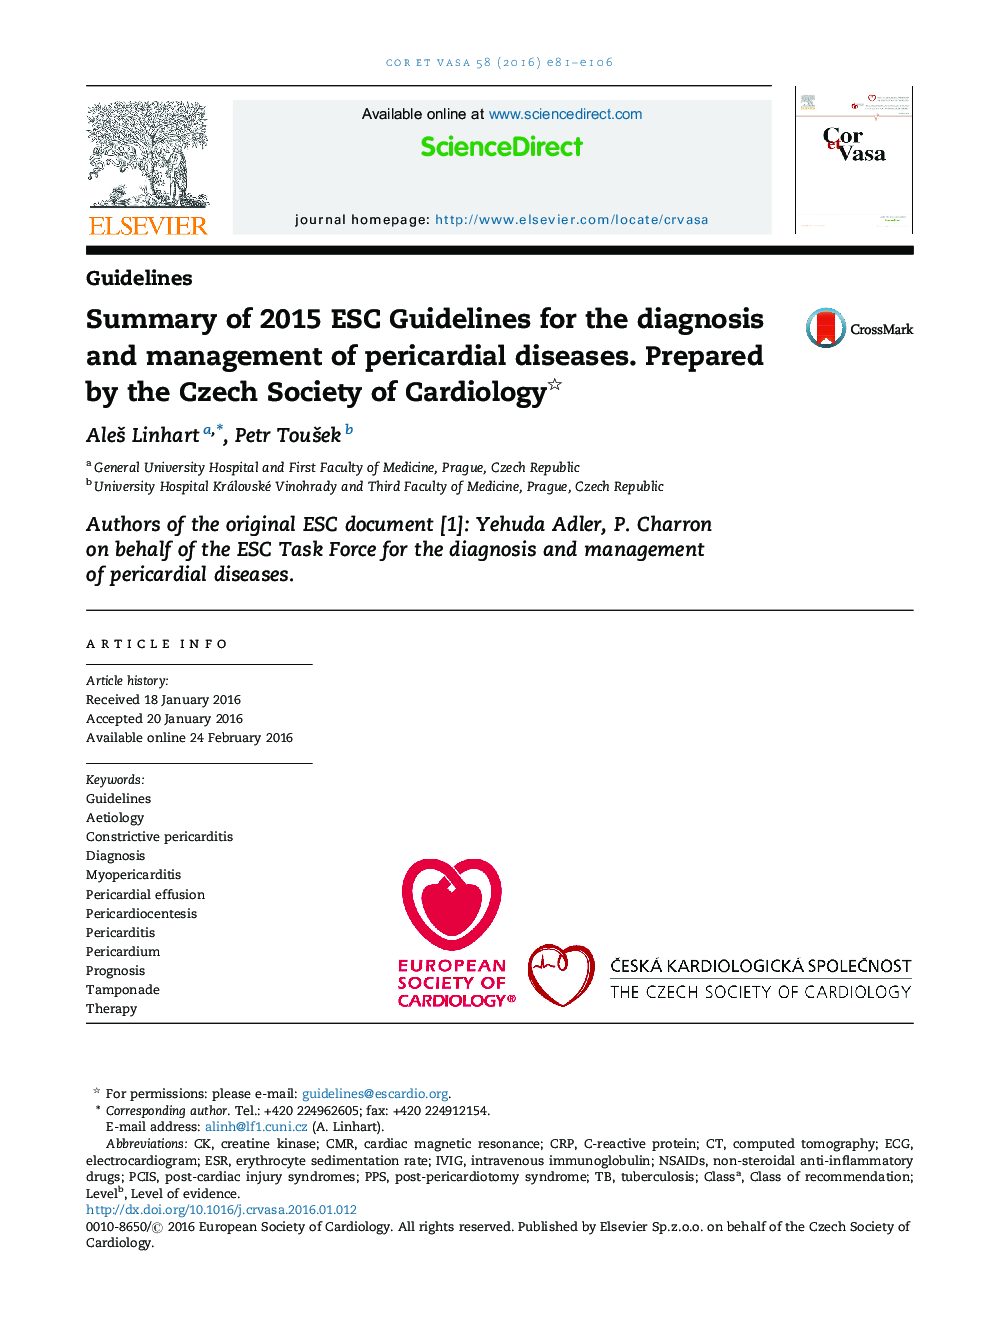 Summary of 2015 ESC Guidelines for the diagnosis and management of pericardial diseases. Prepared by the Czech Society of Cardiology